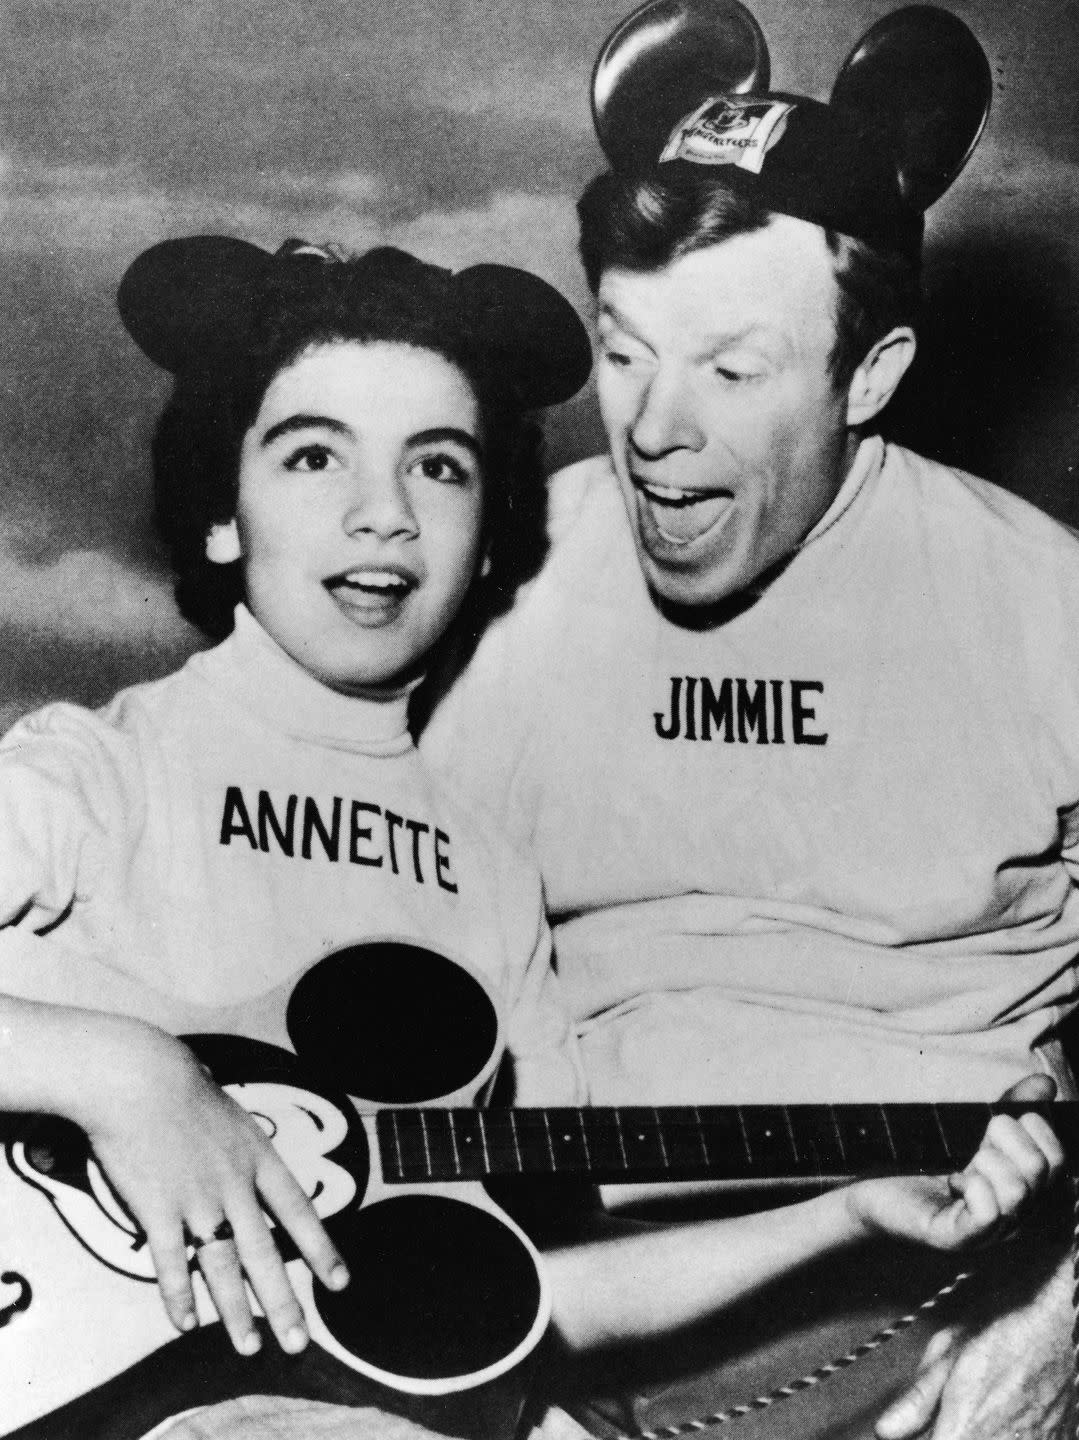 annette funicello plays guitar and sings with jimmie dodd, both wear tops with their names embroidered on them and mickey mouse ear hats